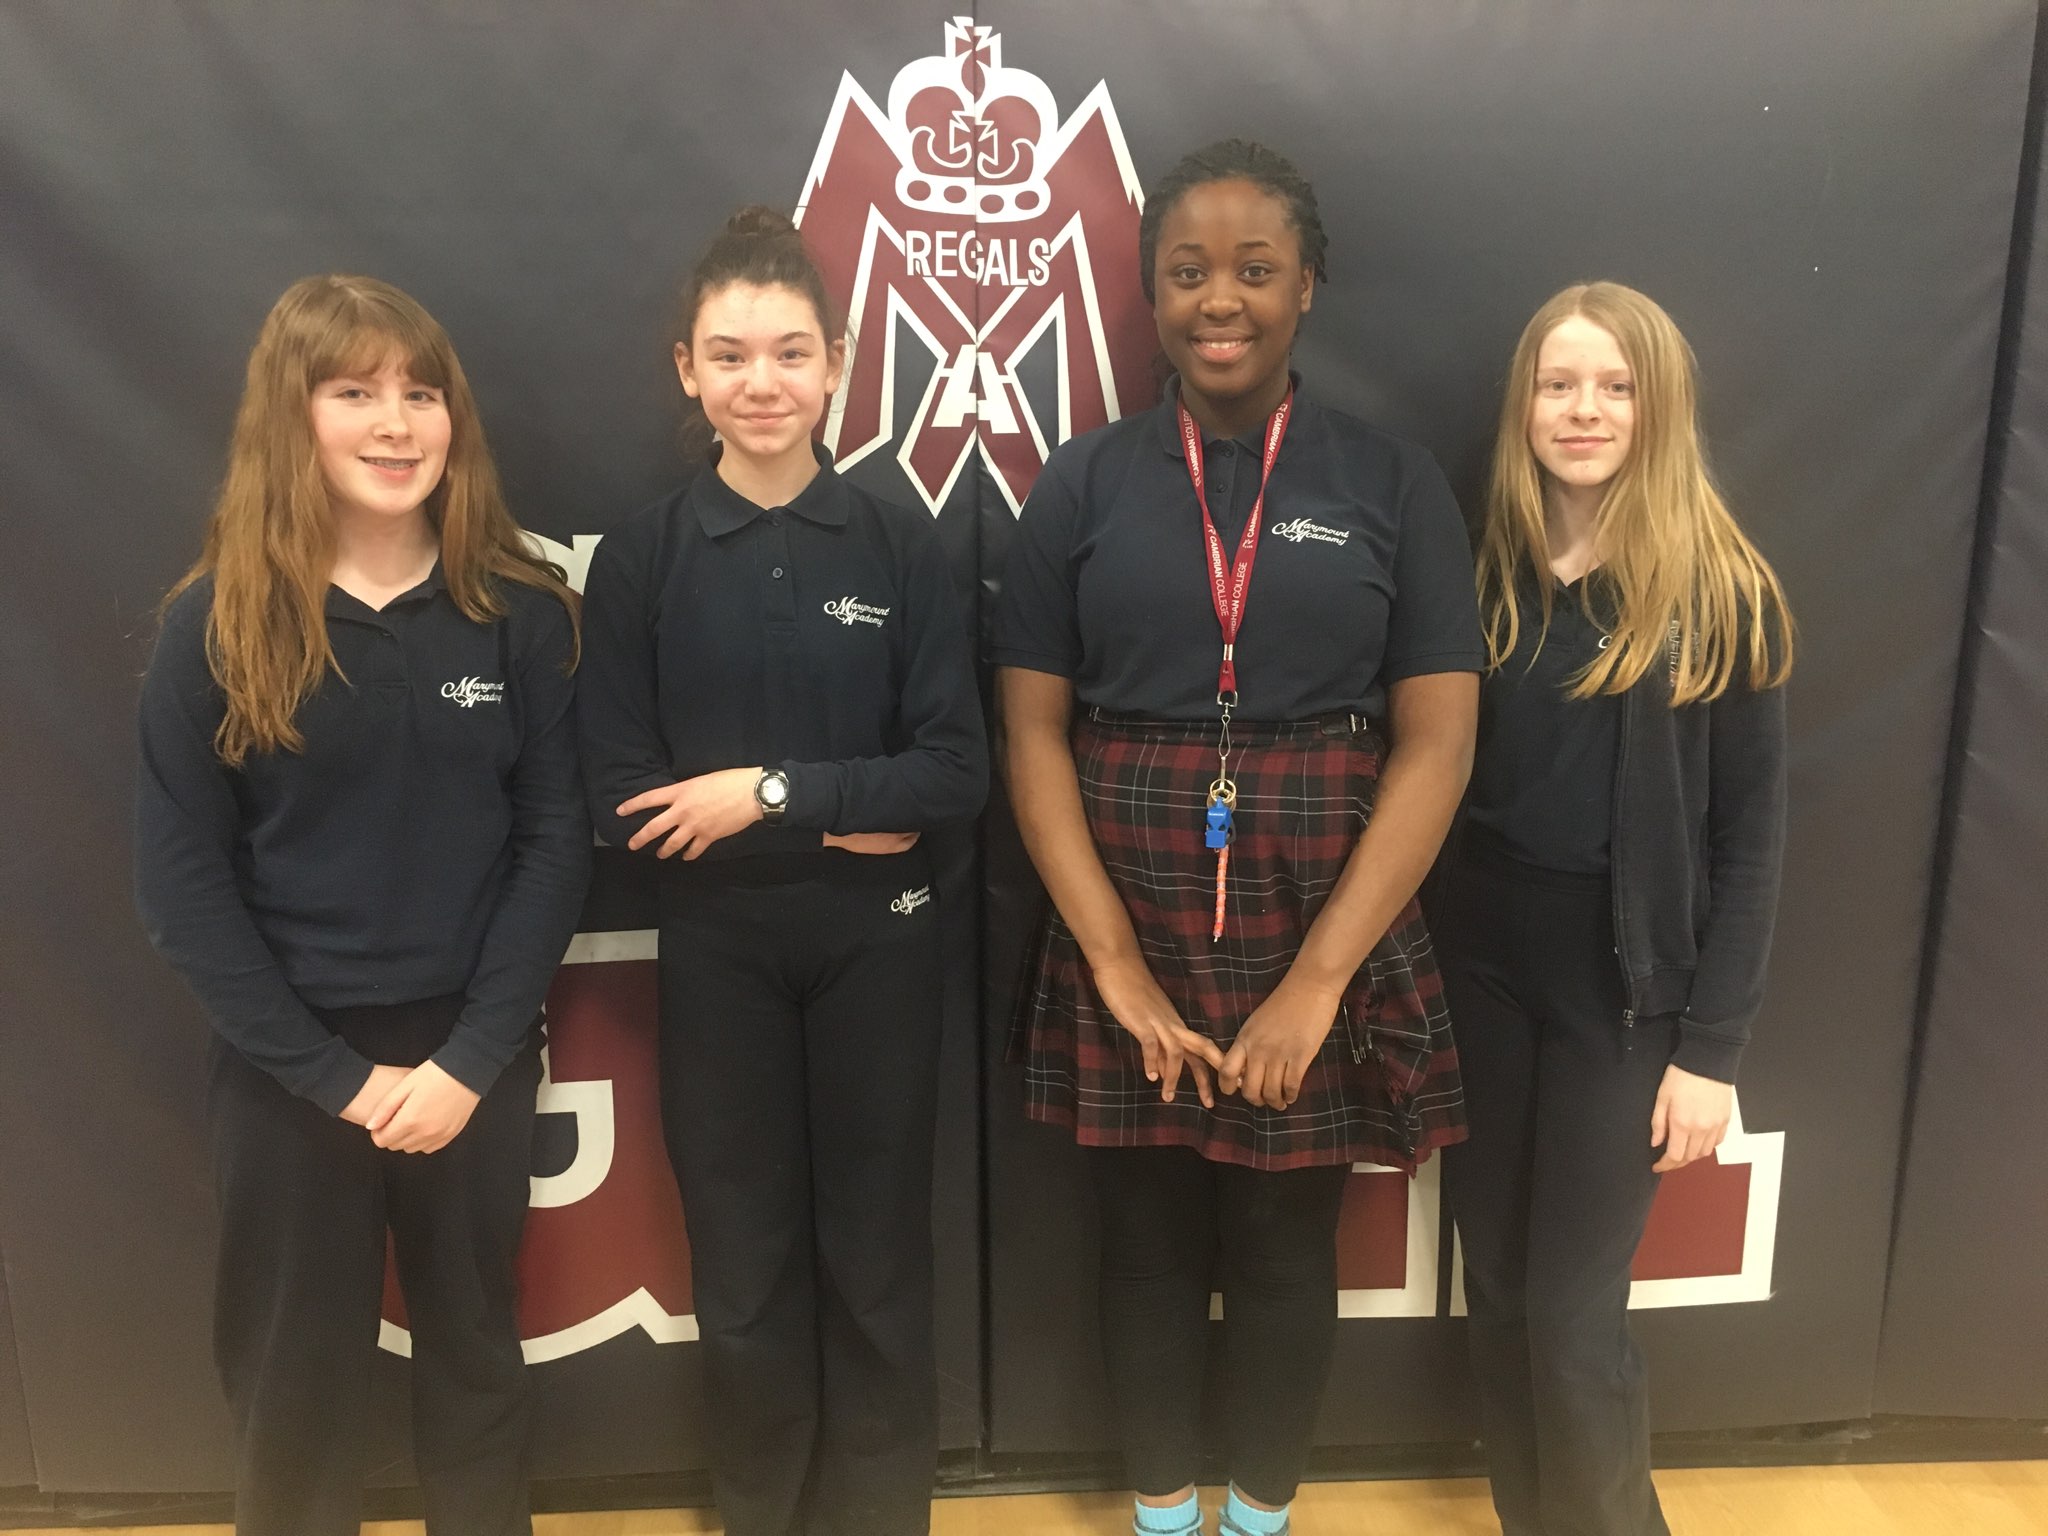 Congratulations to Mrs. Jutila's Grade 8 Marymount Academy students Emma Vellow, Beth Richard, Odossa Oriakhi, Cassidy McLardie and Mackenzie Michalowicz (not pictured) for winning second place in the Ontario Catholic School Trustees Association video contest.